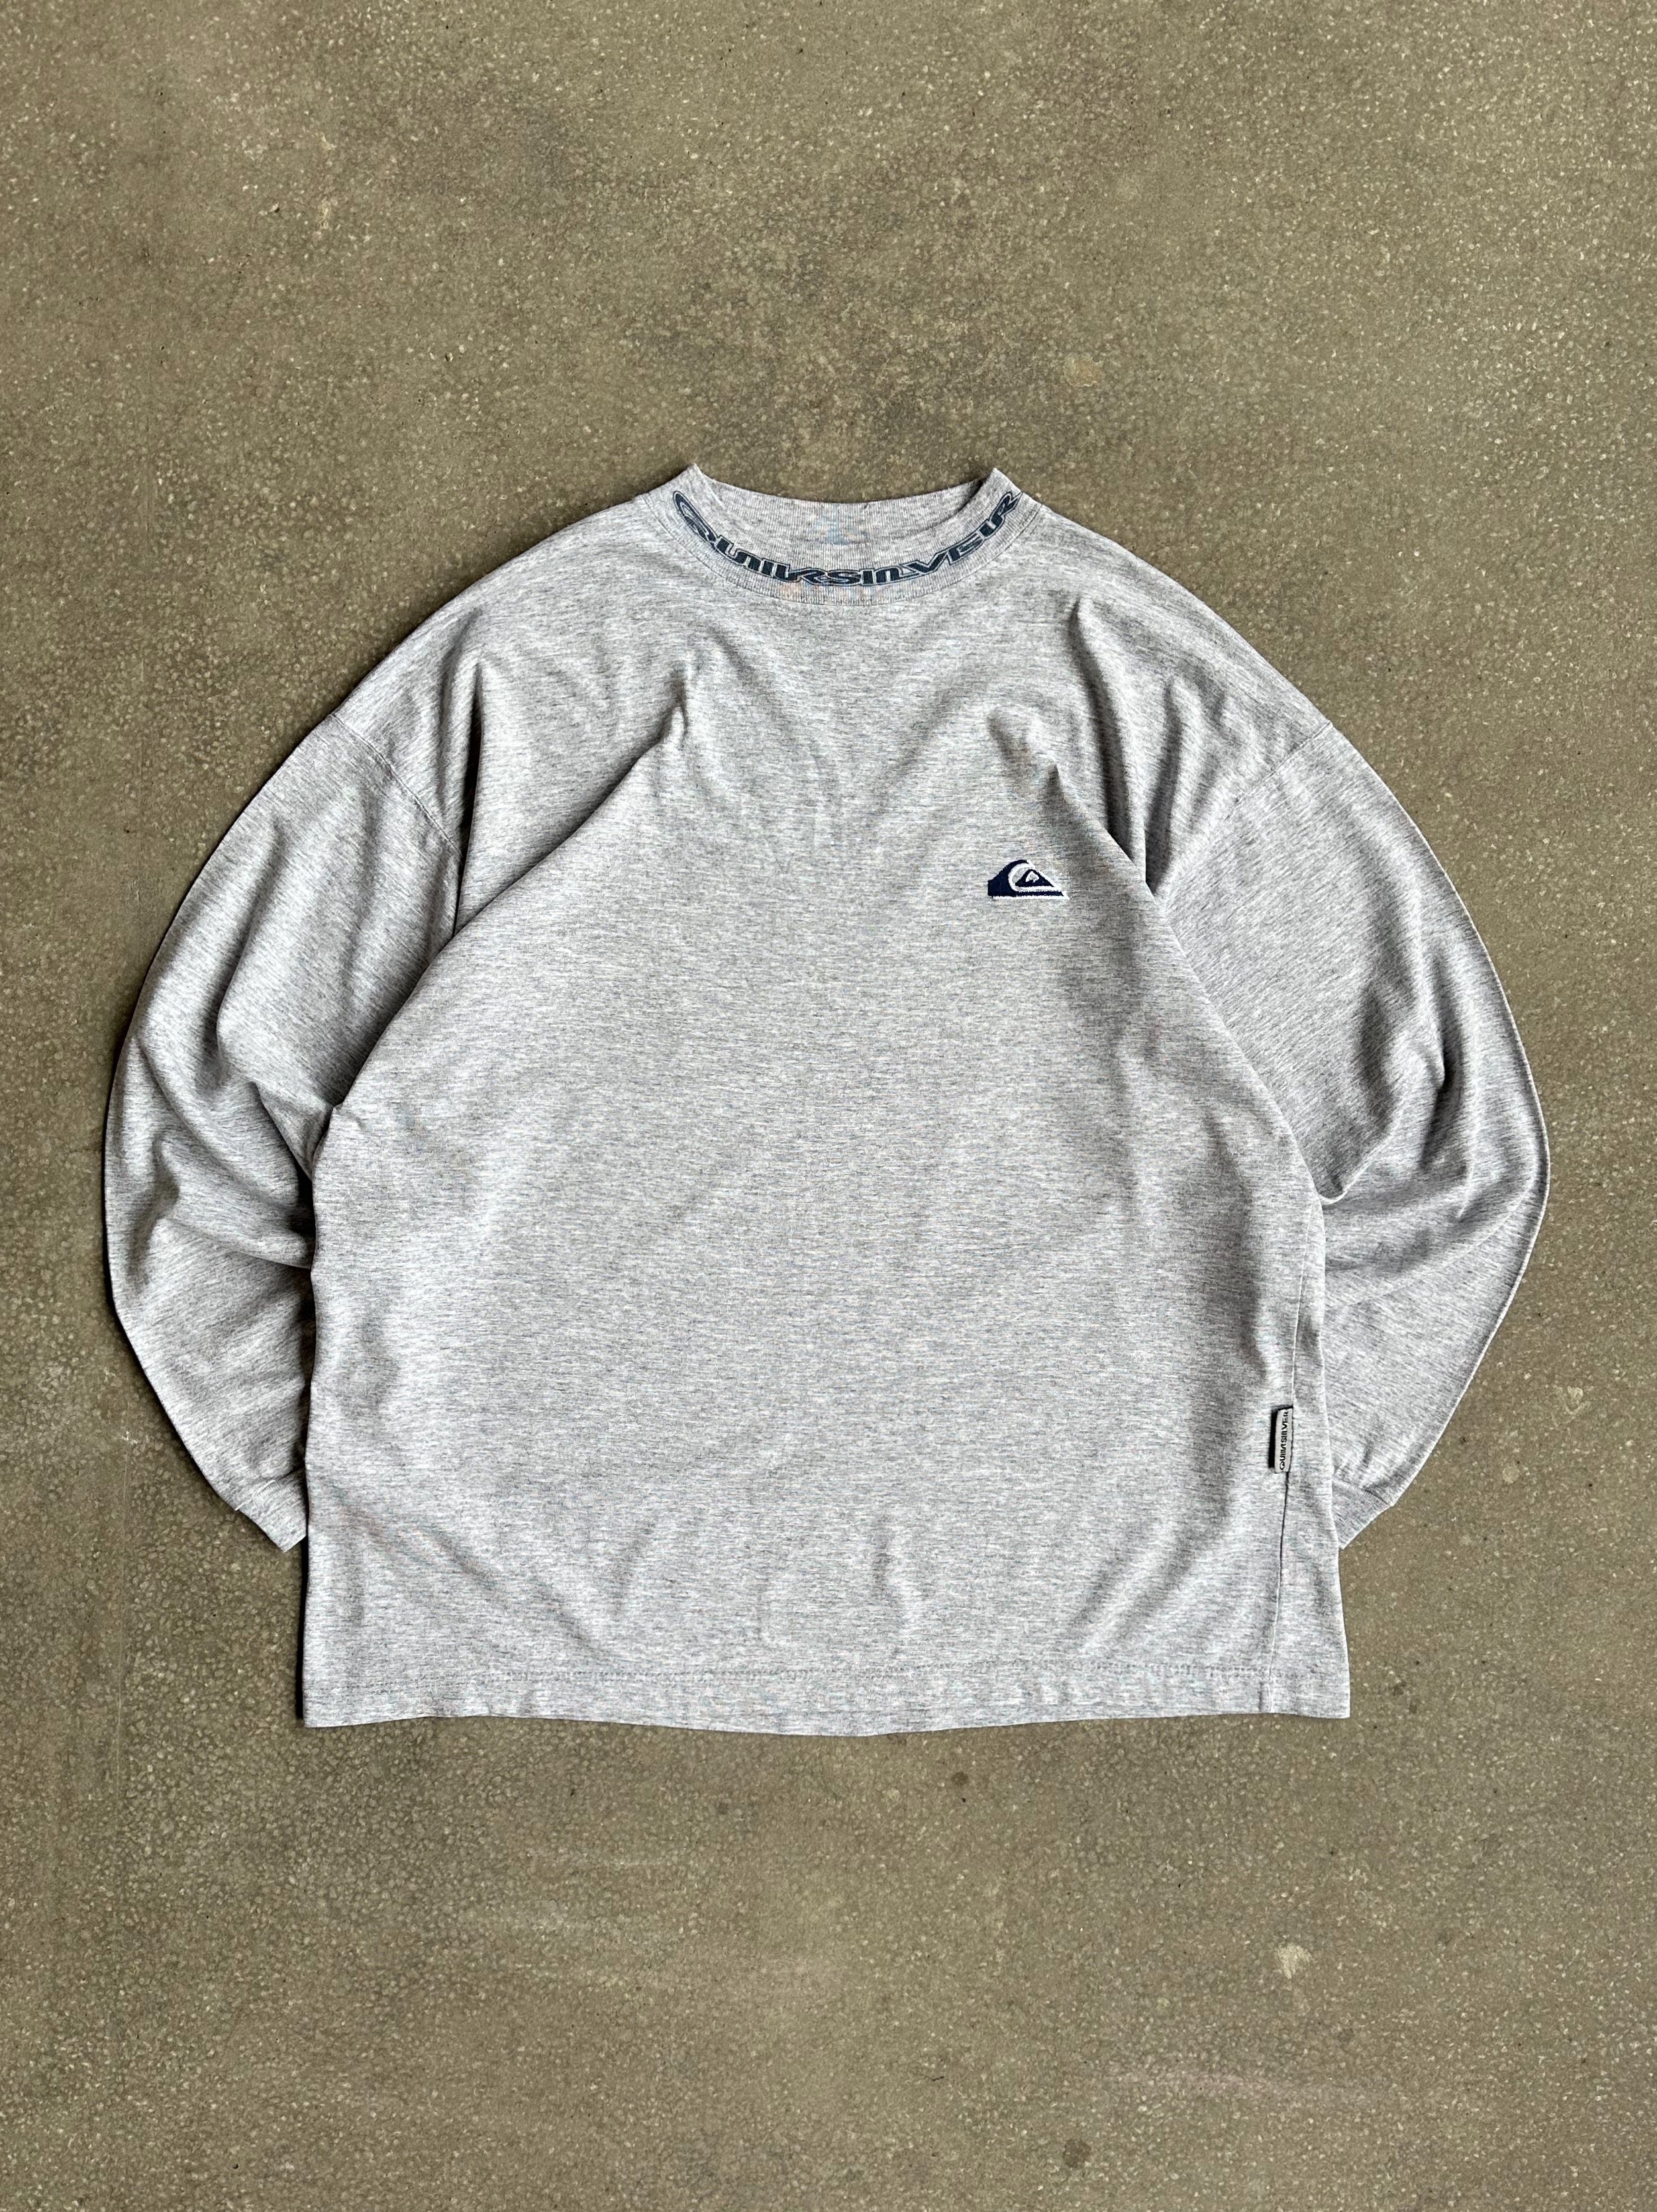 Vintage Quiksilver Long sleeve Tee - Large/Extra Large